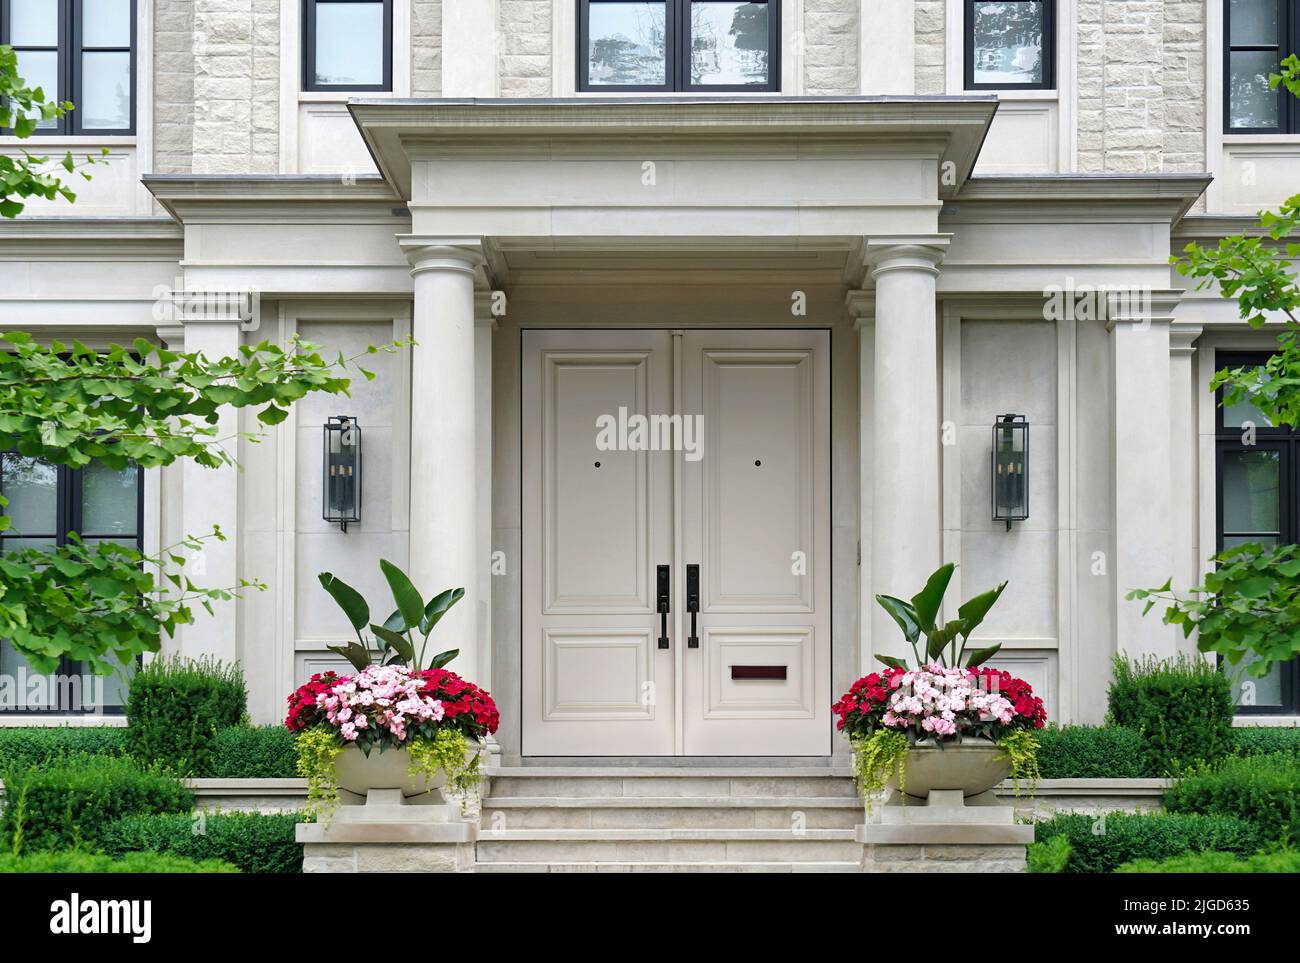 House entrance with columns surrounded by pots of flowers Stock Photo